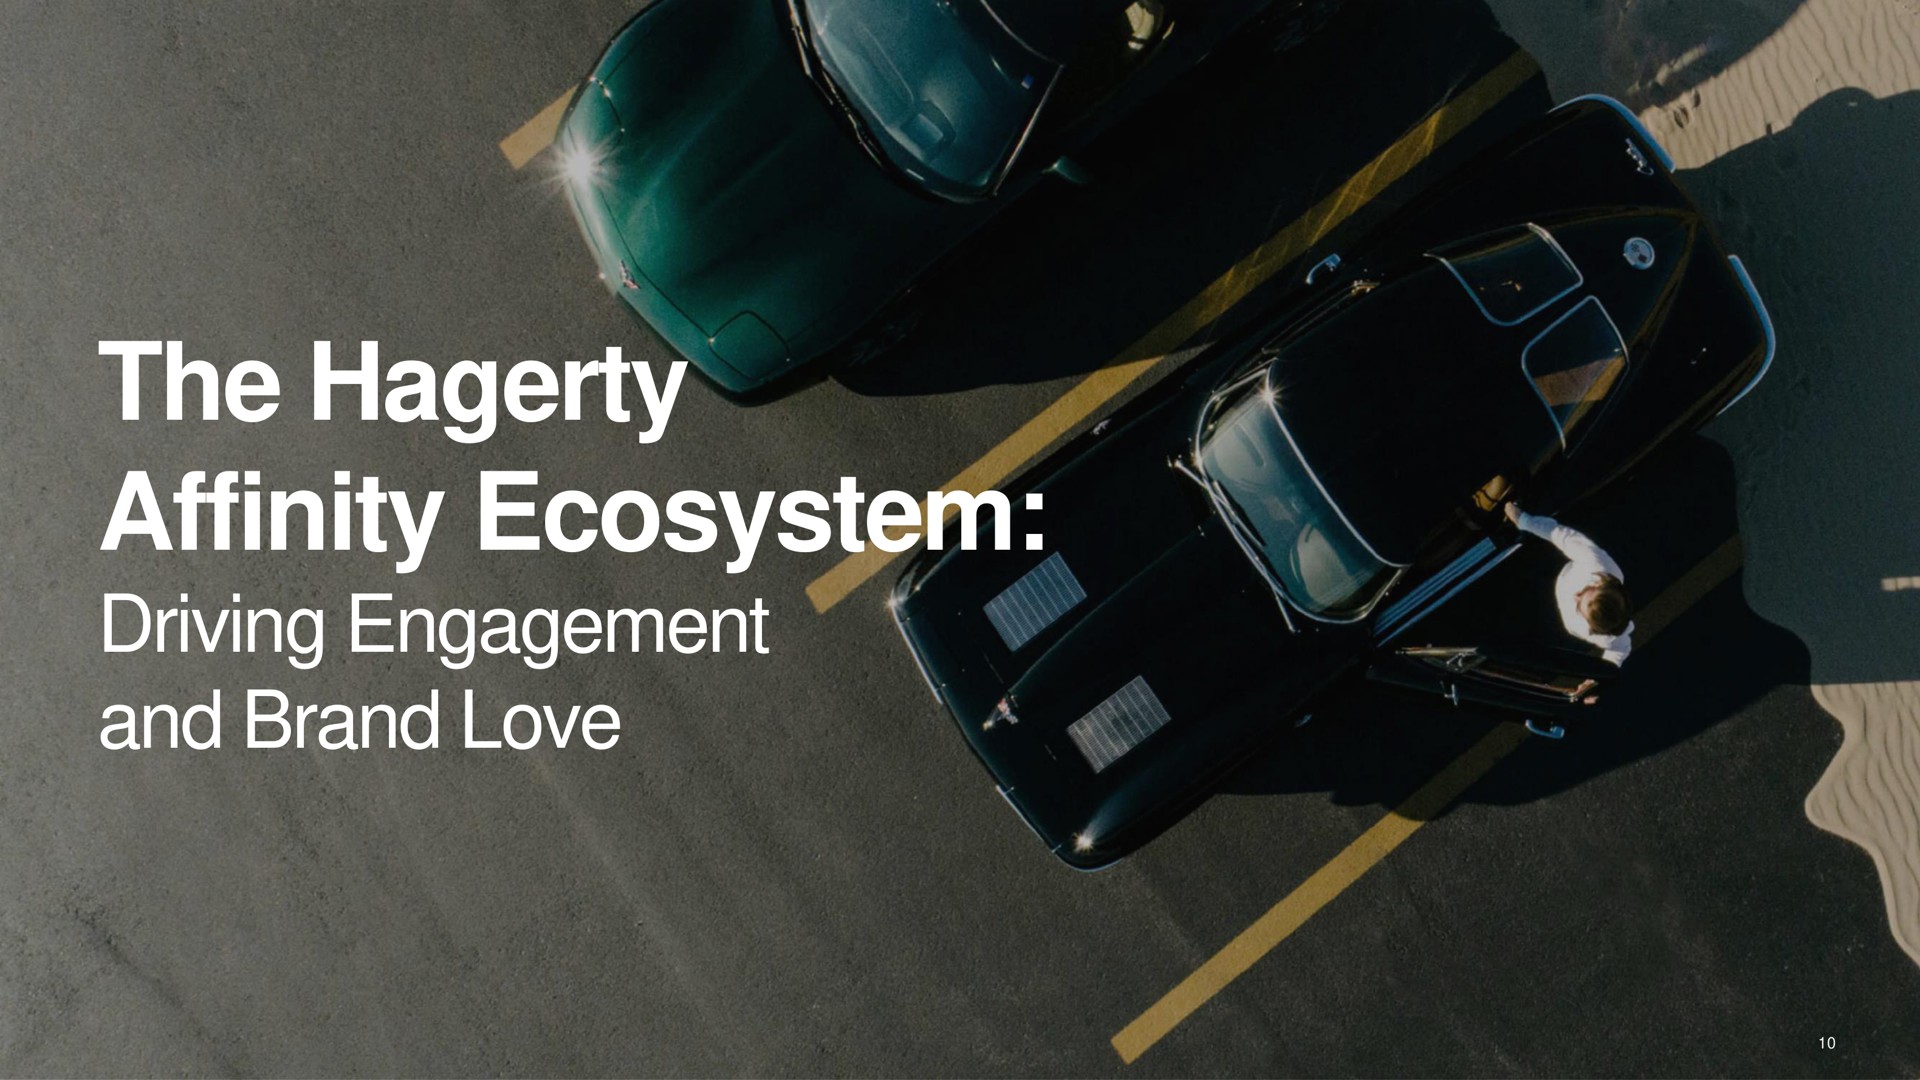 the affinity ecosystem driving engagement and brand love | Hagerty